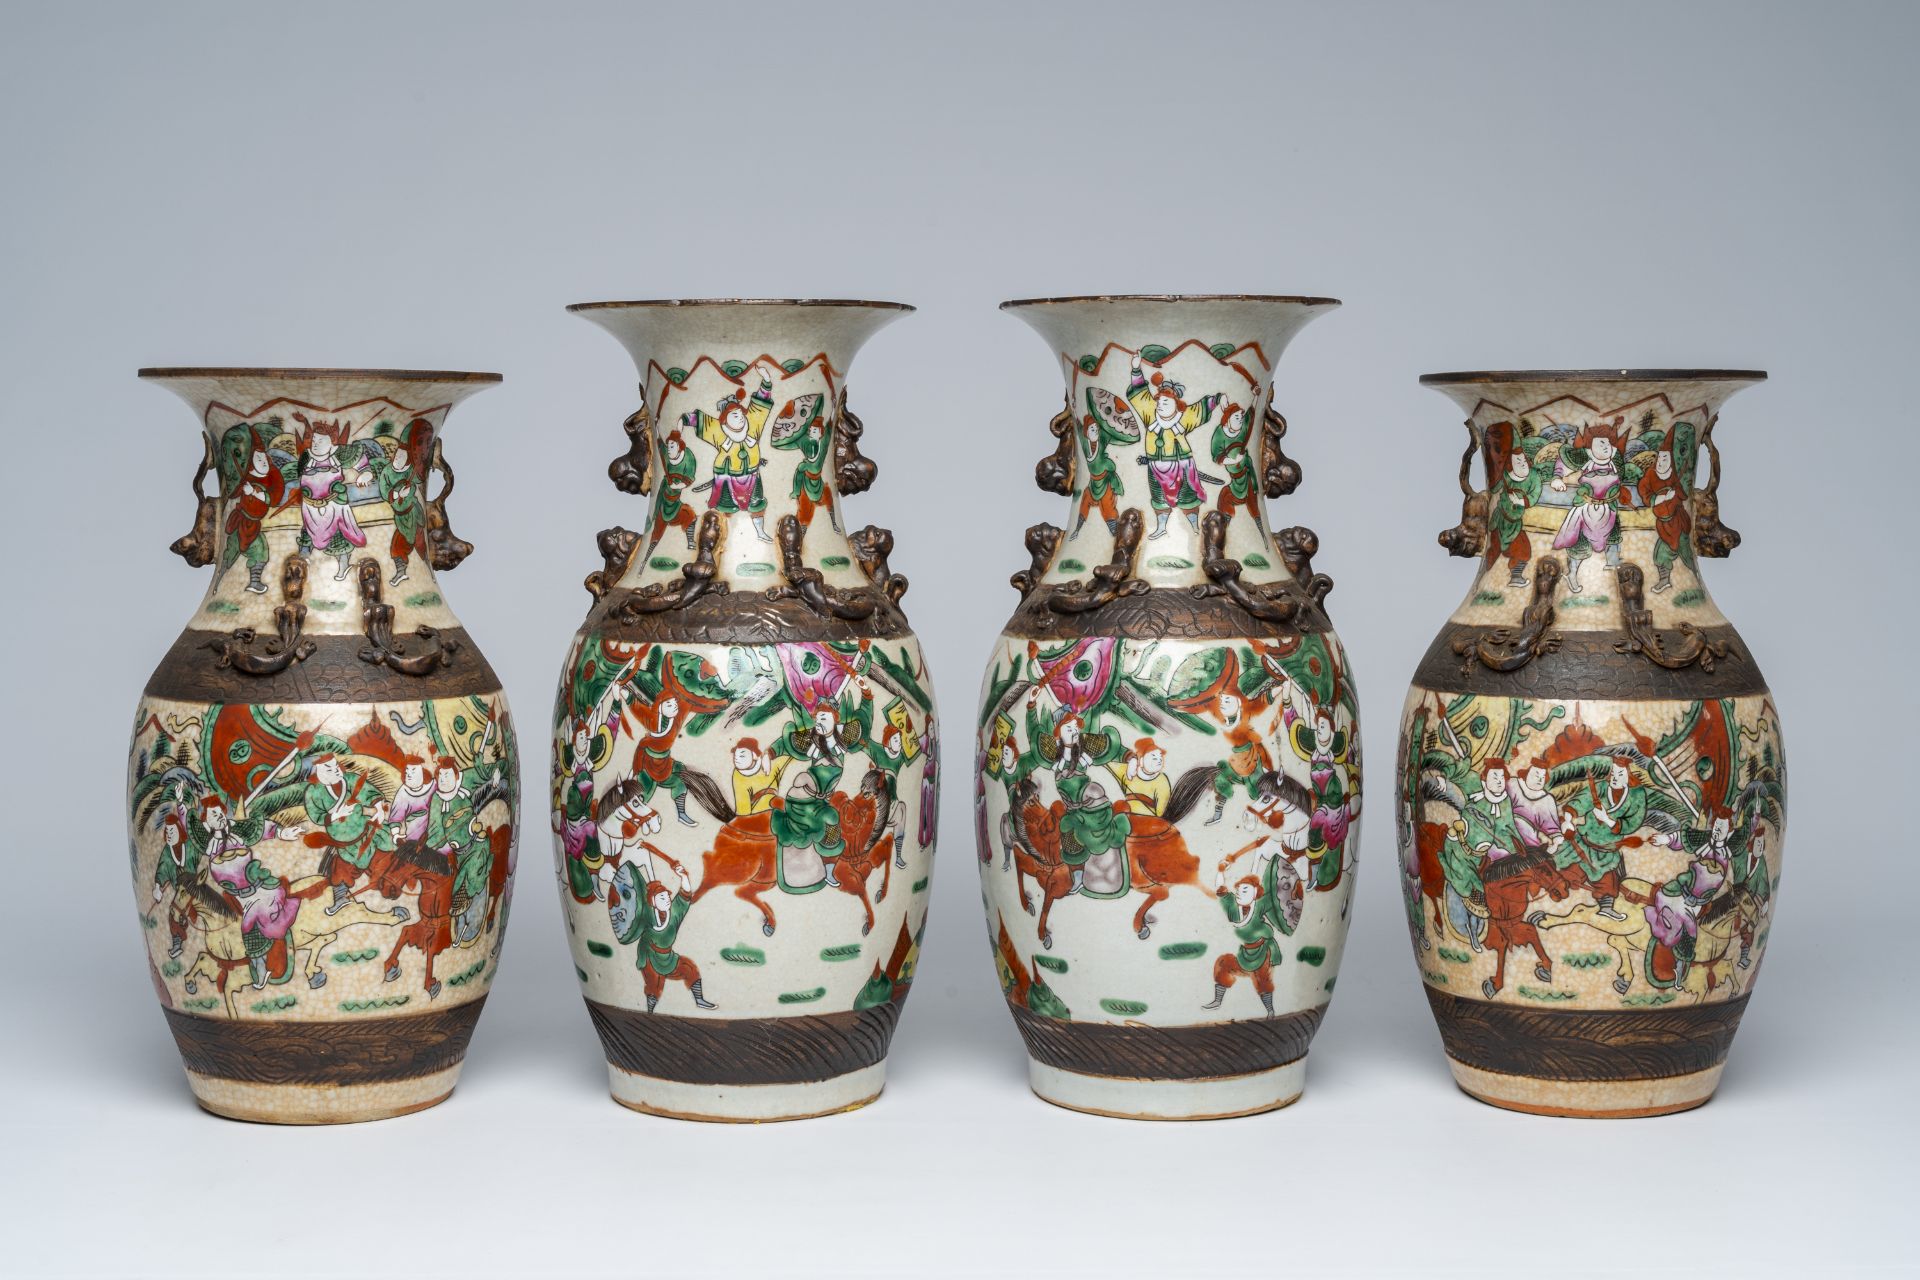 Two pairs of Chinese Nanking crackle glazed famille rose 'warrior' vases, 19th C.